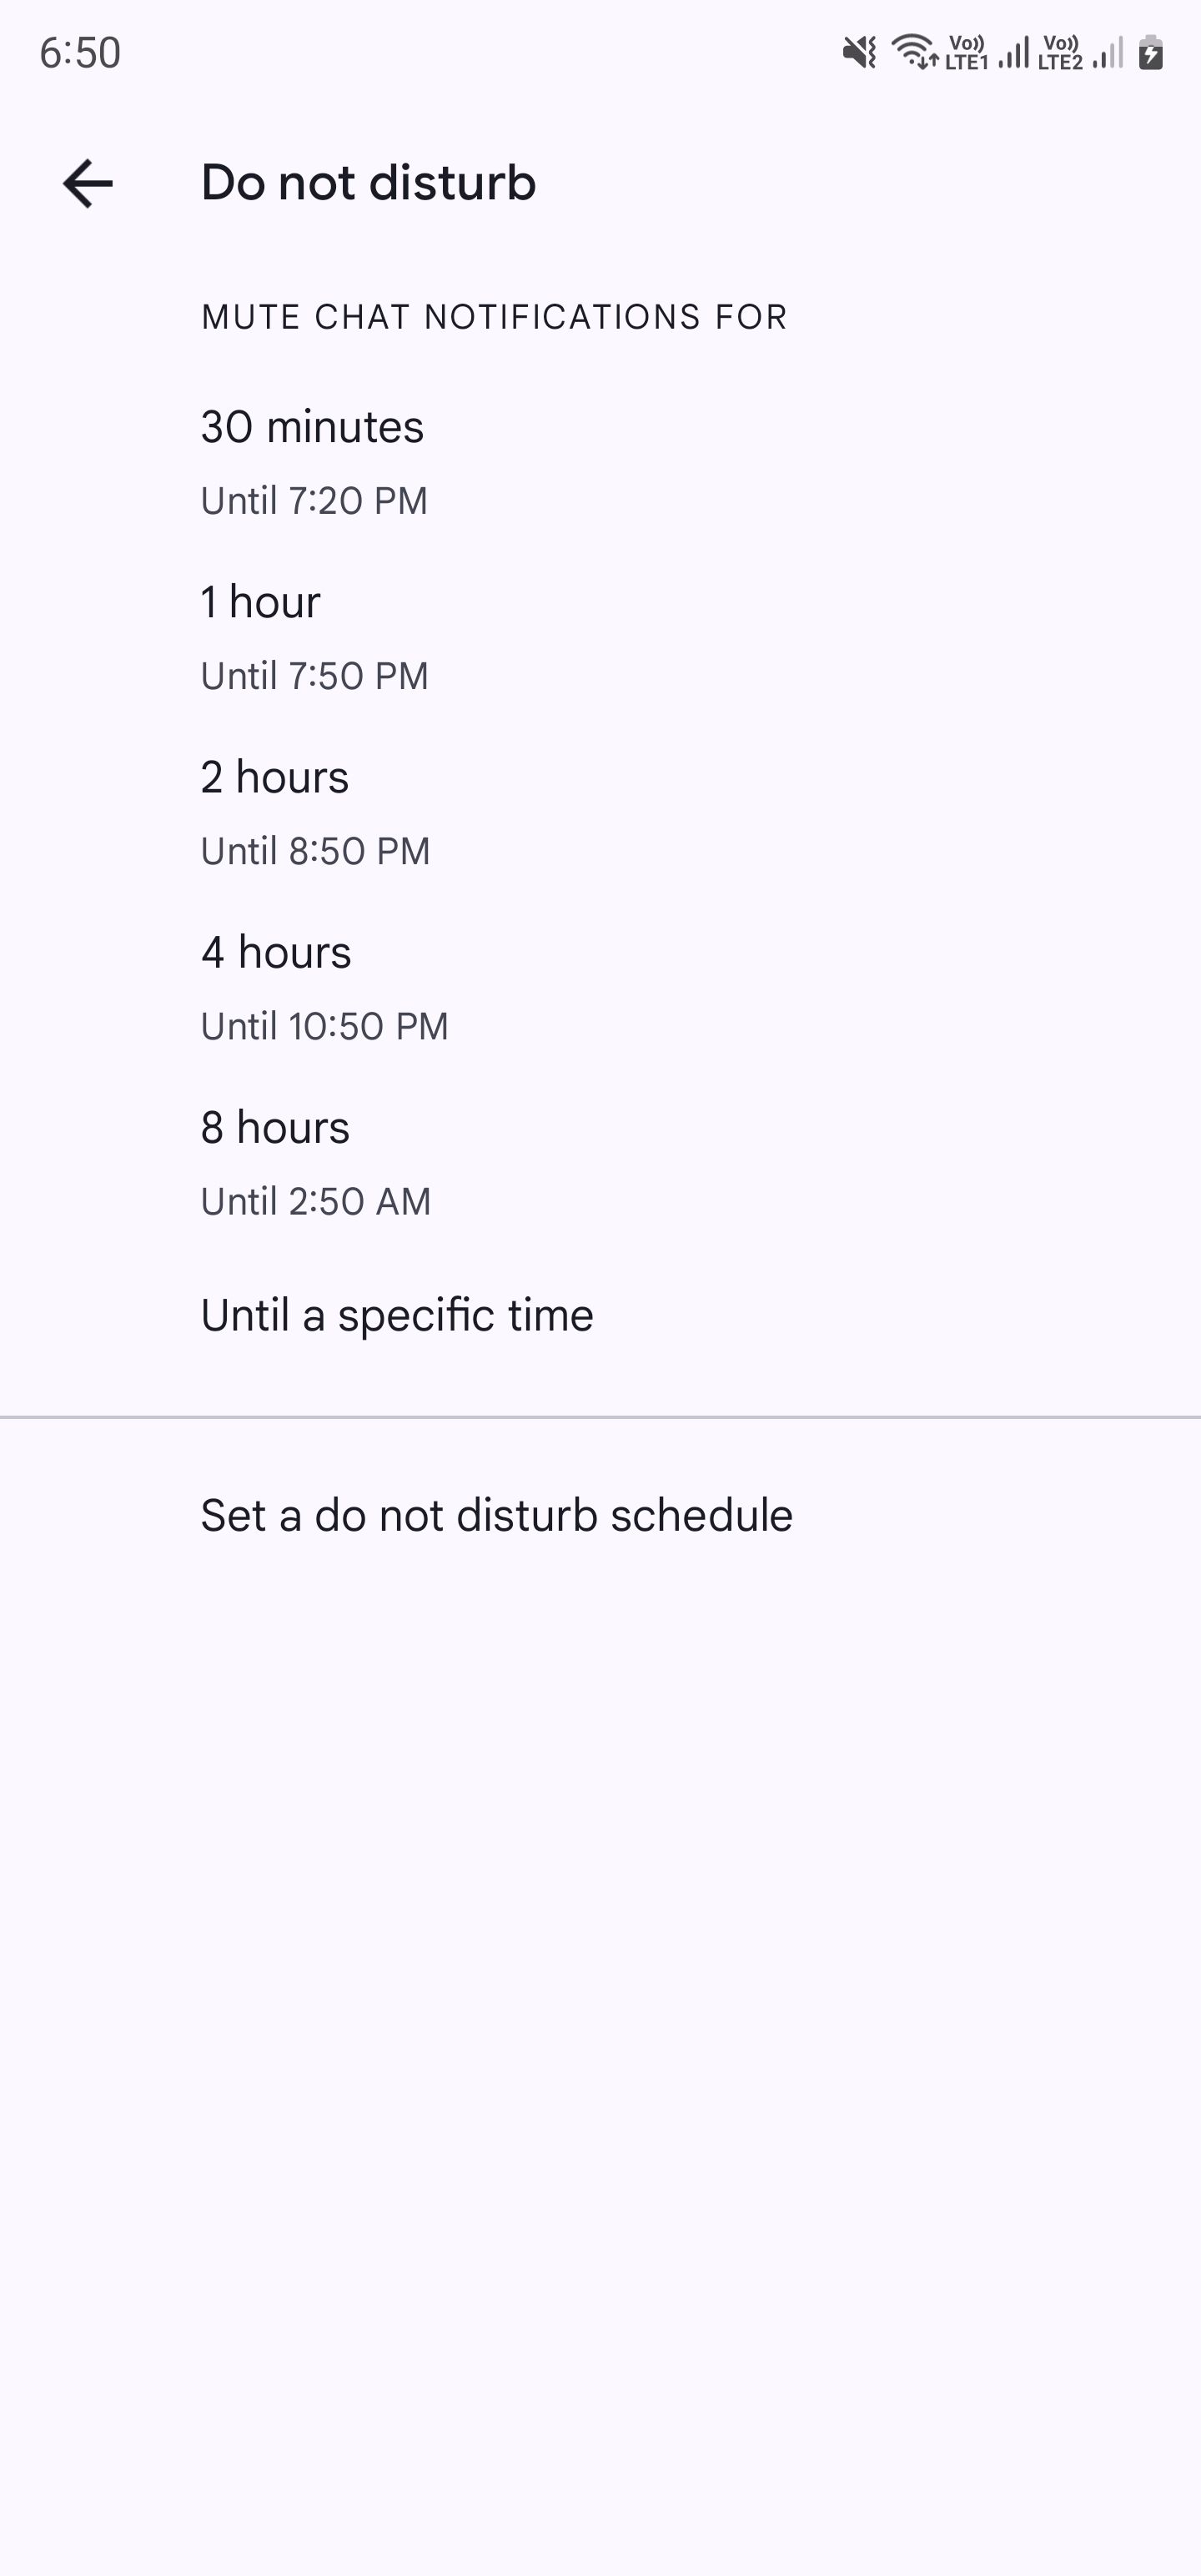 Setting a Do Not Disturb schedule in Google Chat.